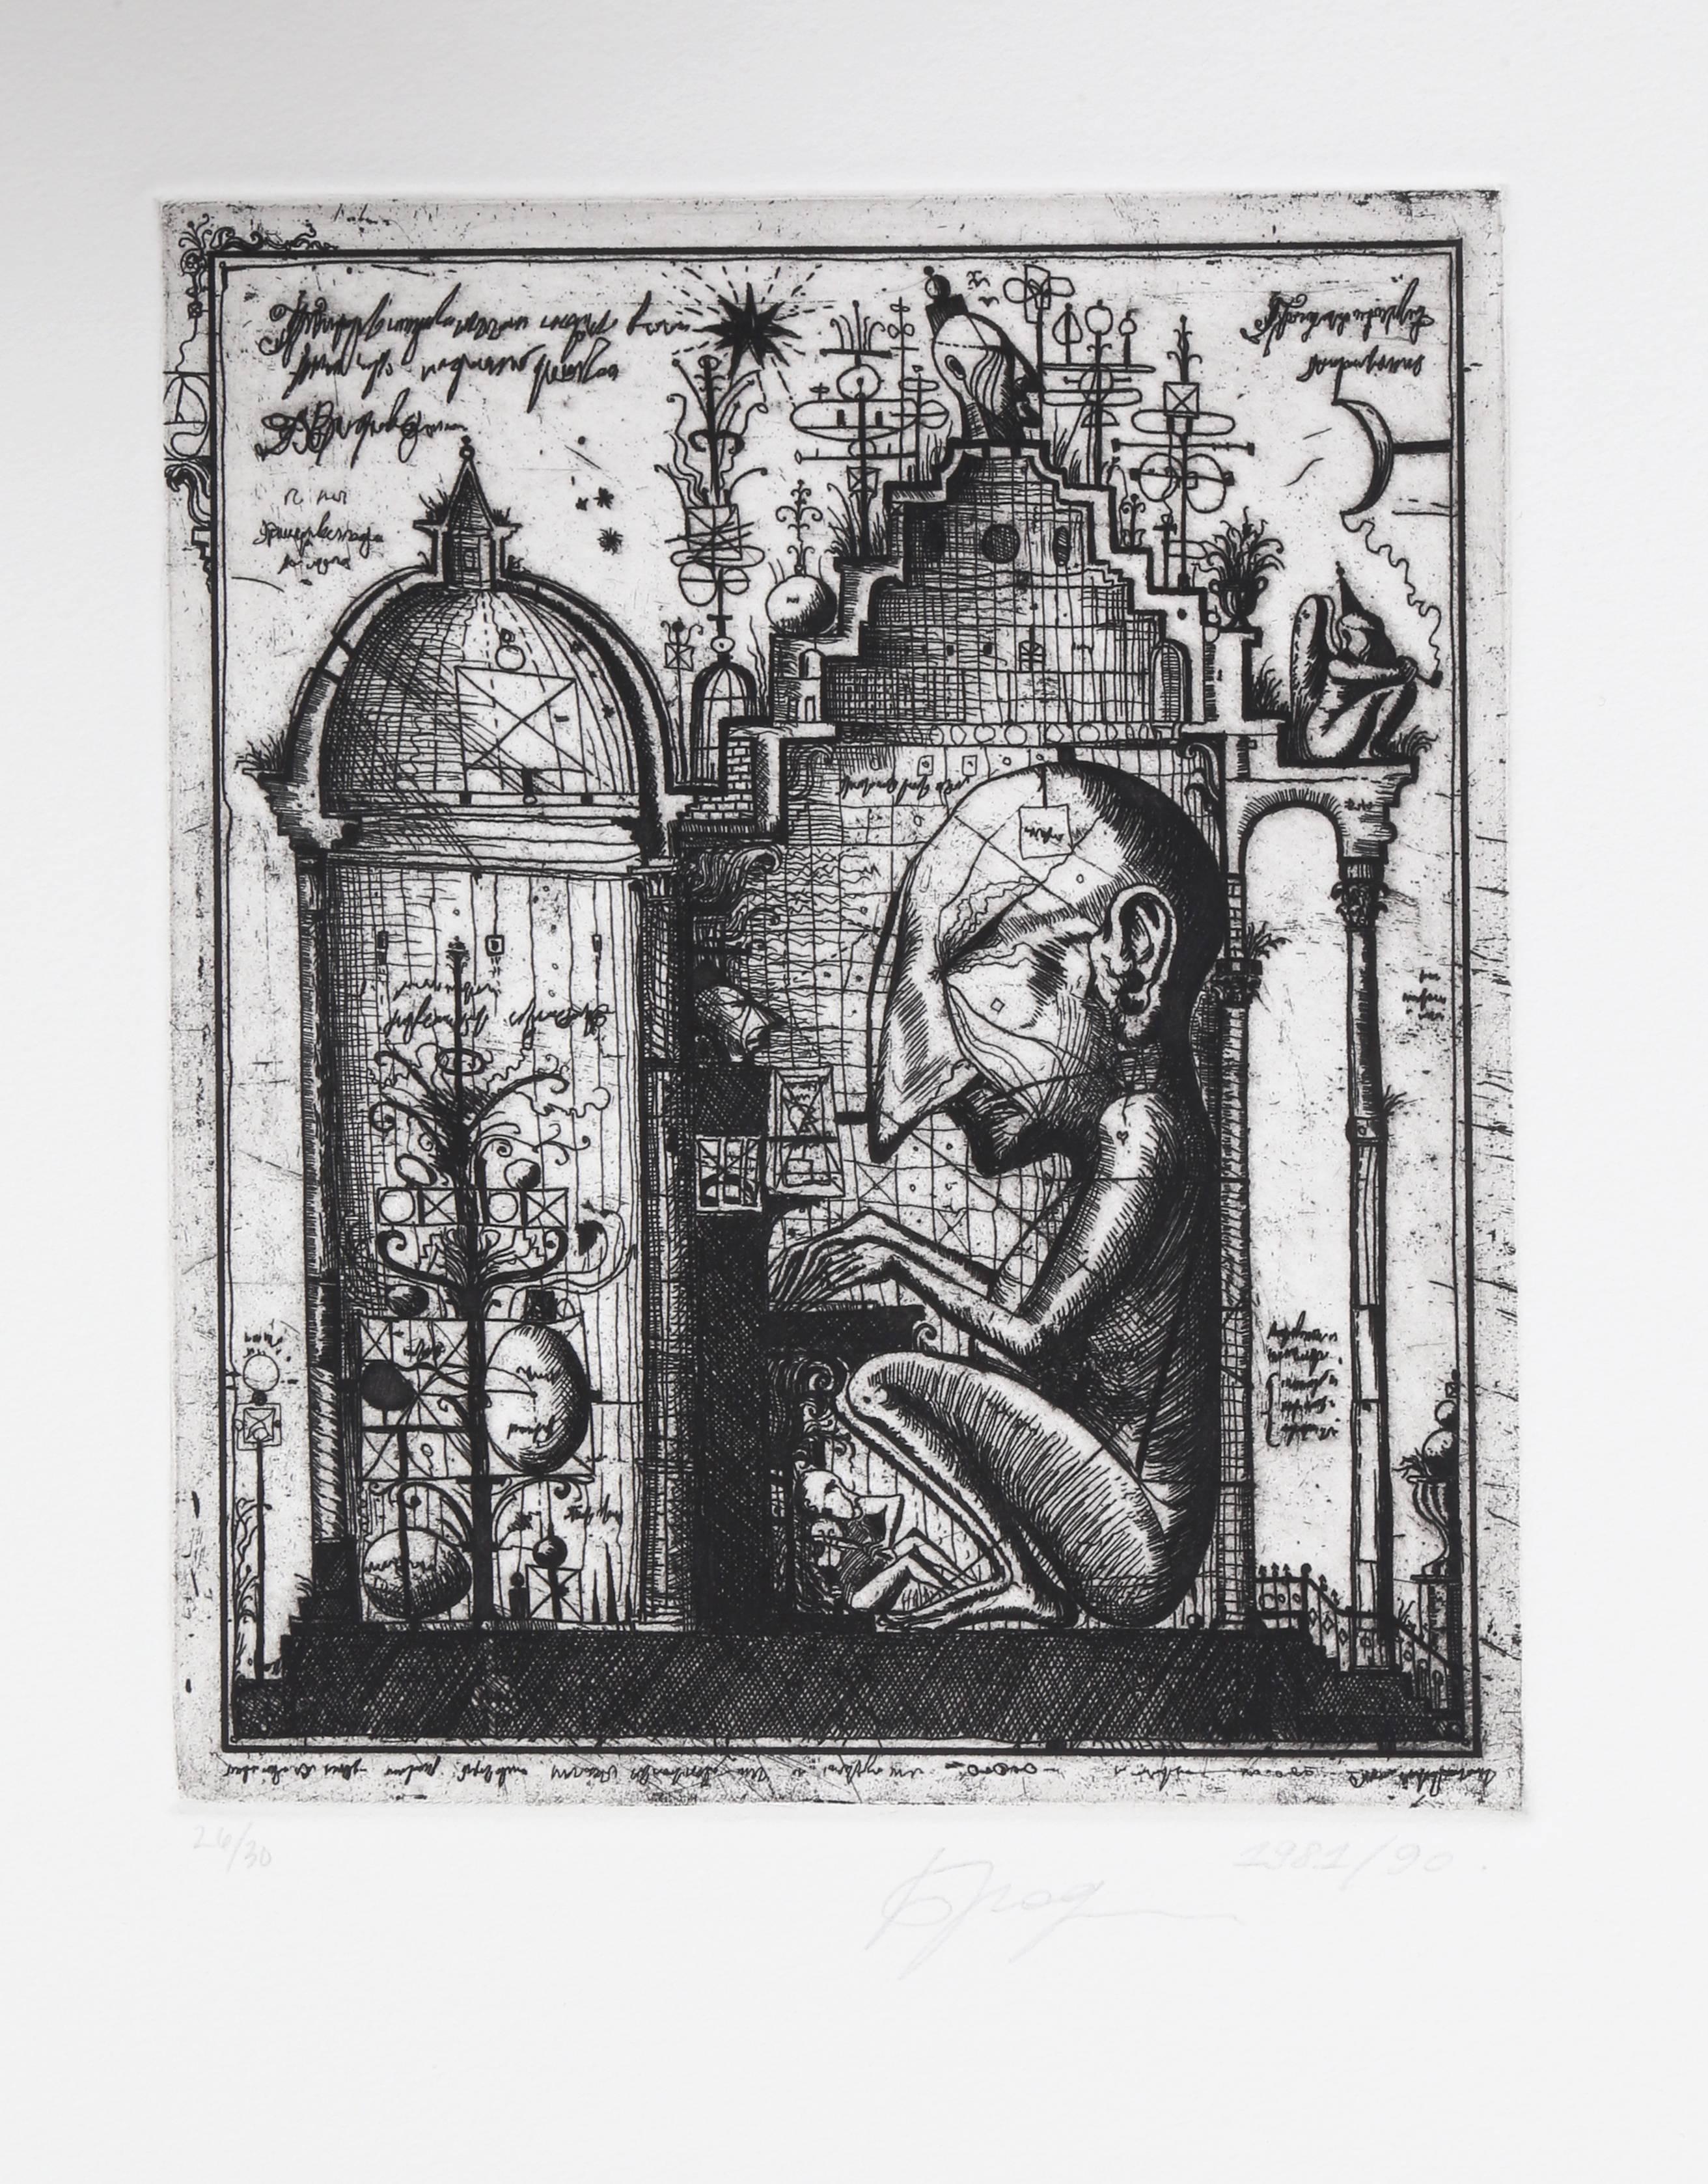 Alexander Brodsky and Ilya Utkin Abstract Print - Piano Player from Brodsky and Utkin: Projects 1981 - 1990